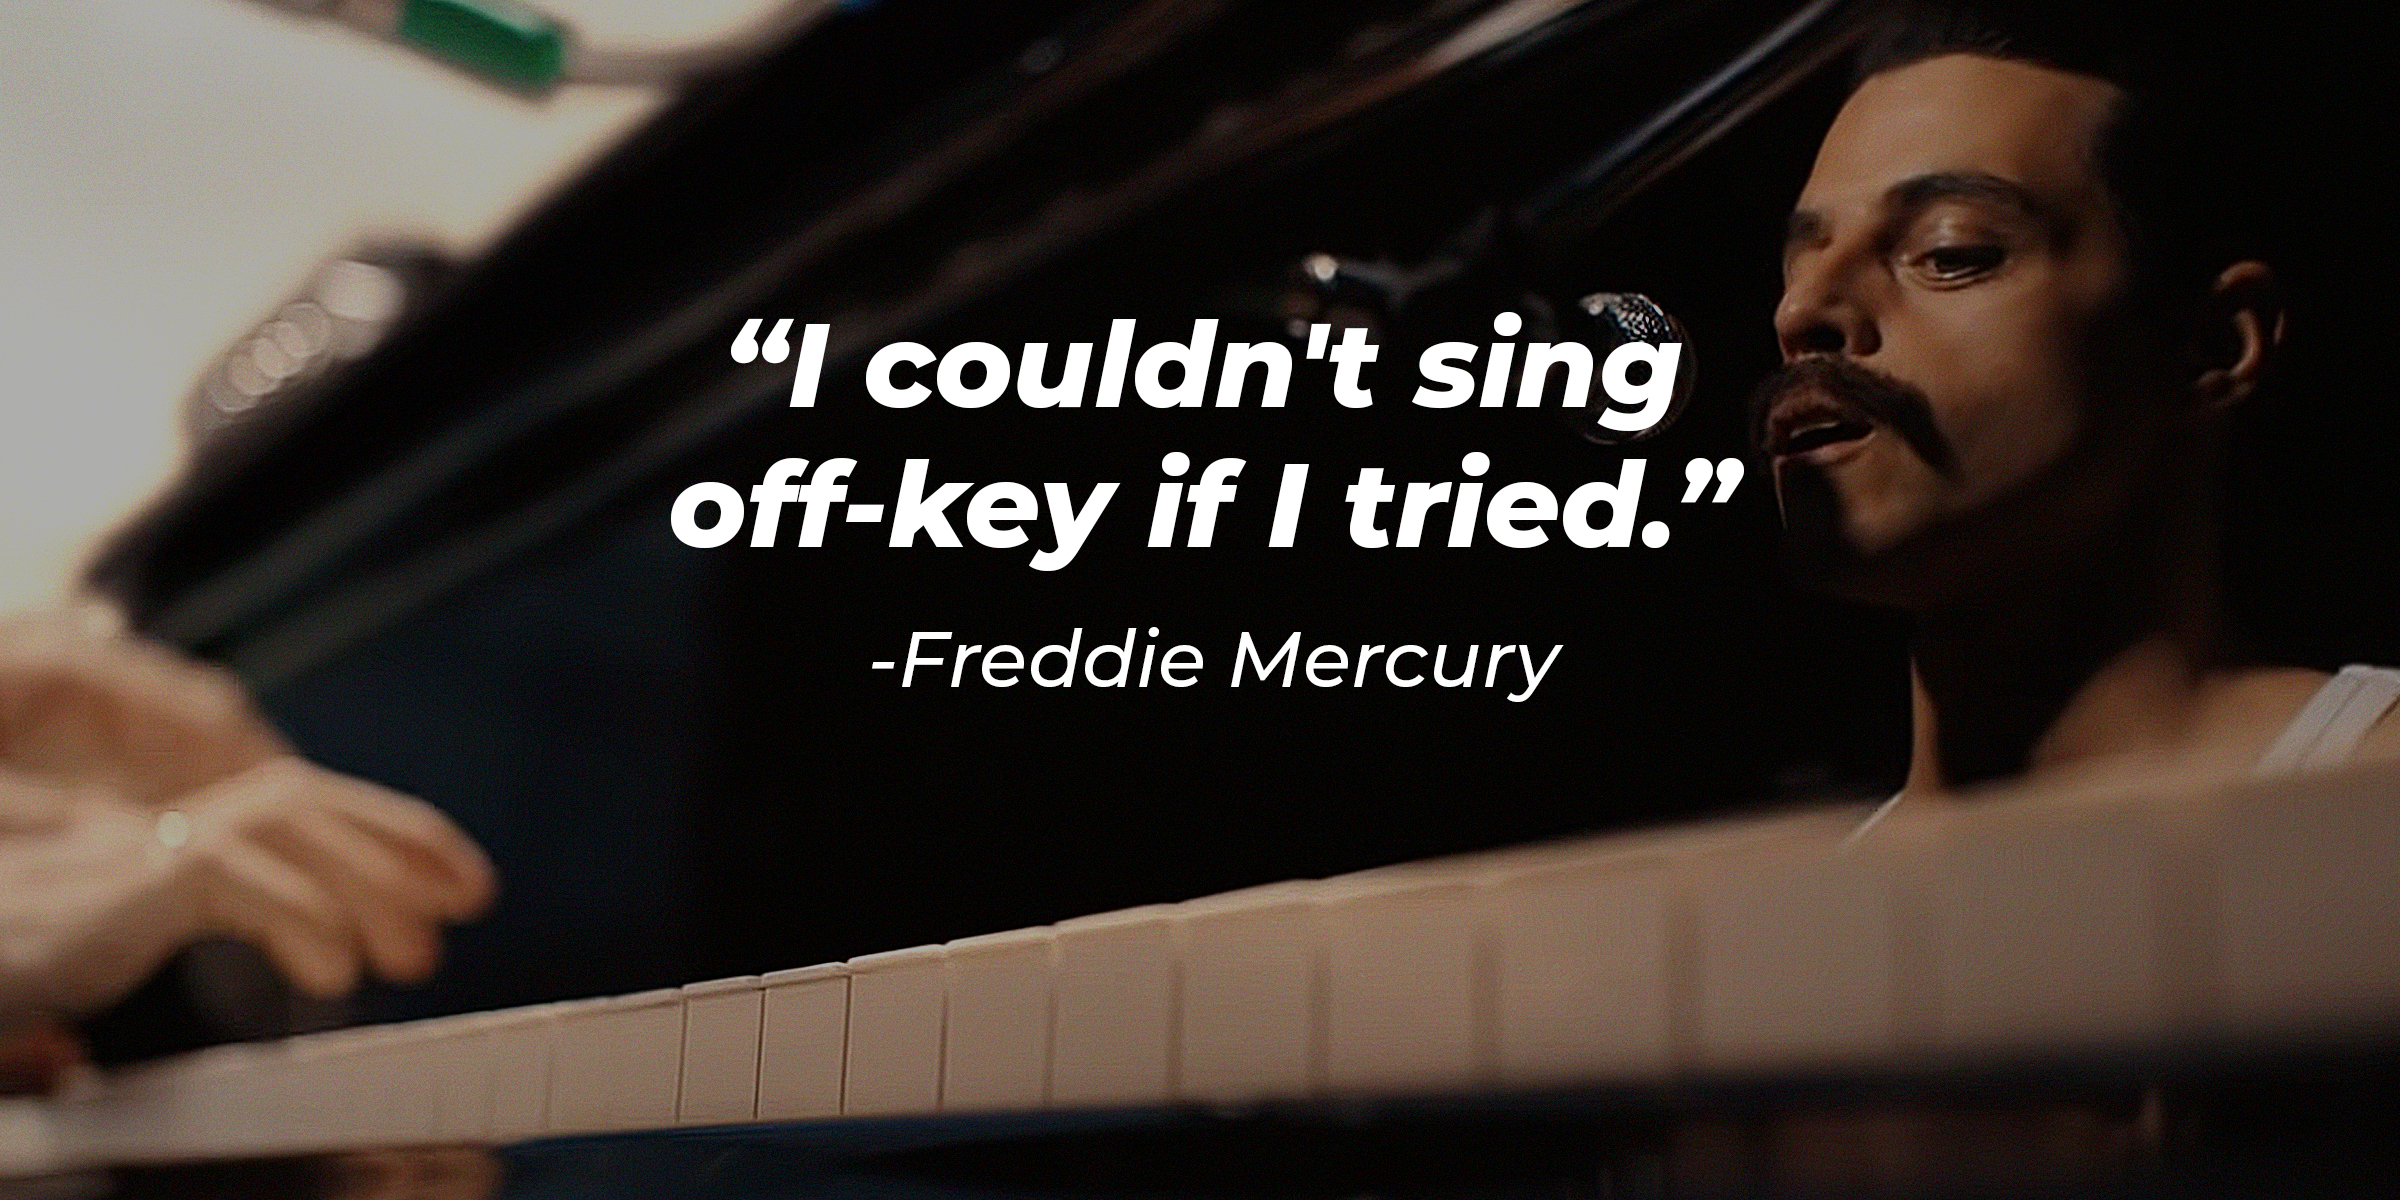 Freddie Mercury with his quote: "I couldn't sing off-key if I tried." | Source: YouTube.com/20thCenturyStudios